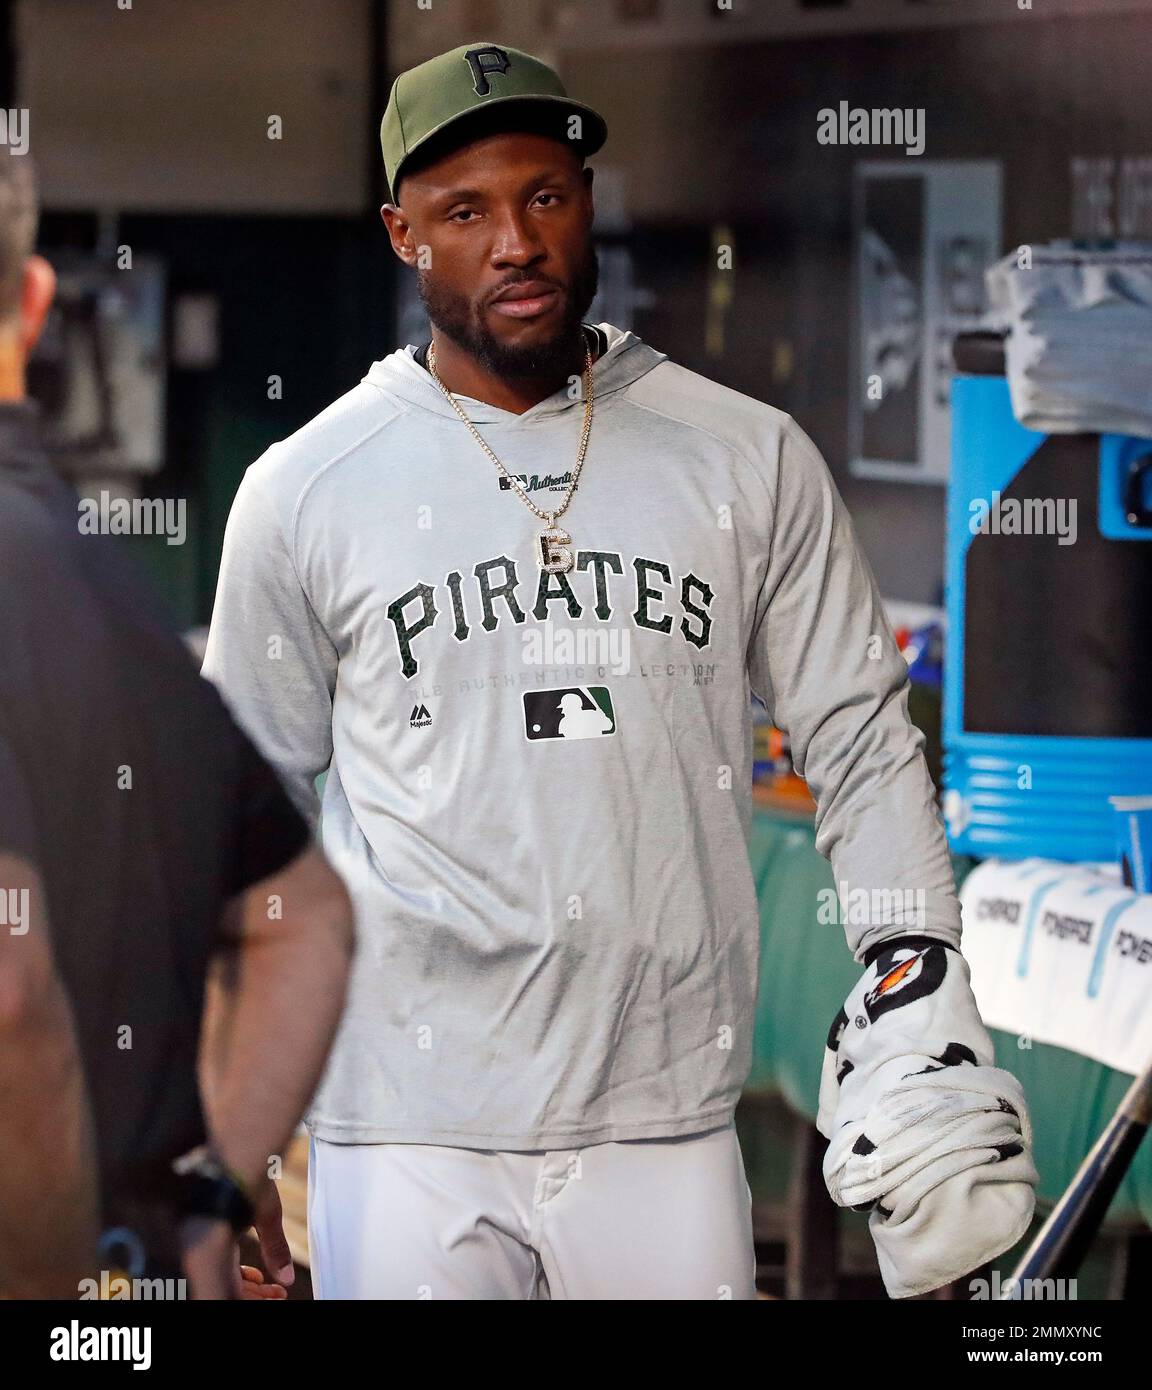 starling marte muscles